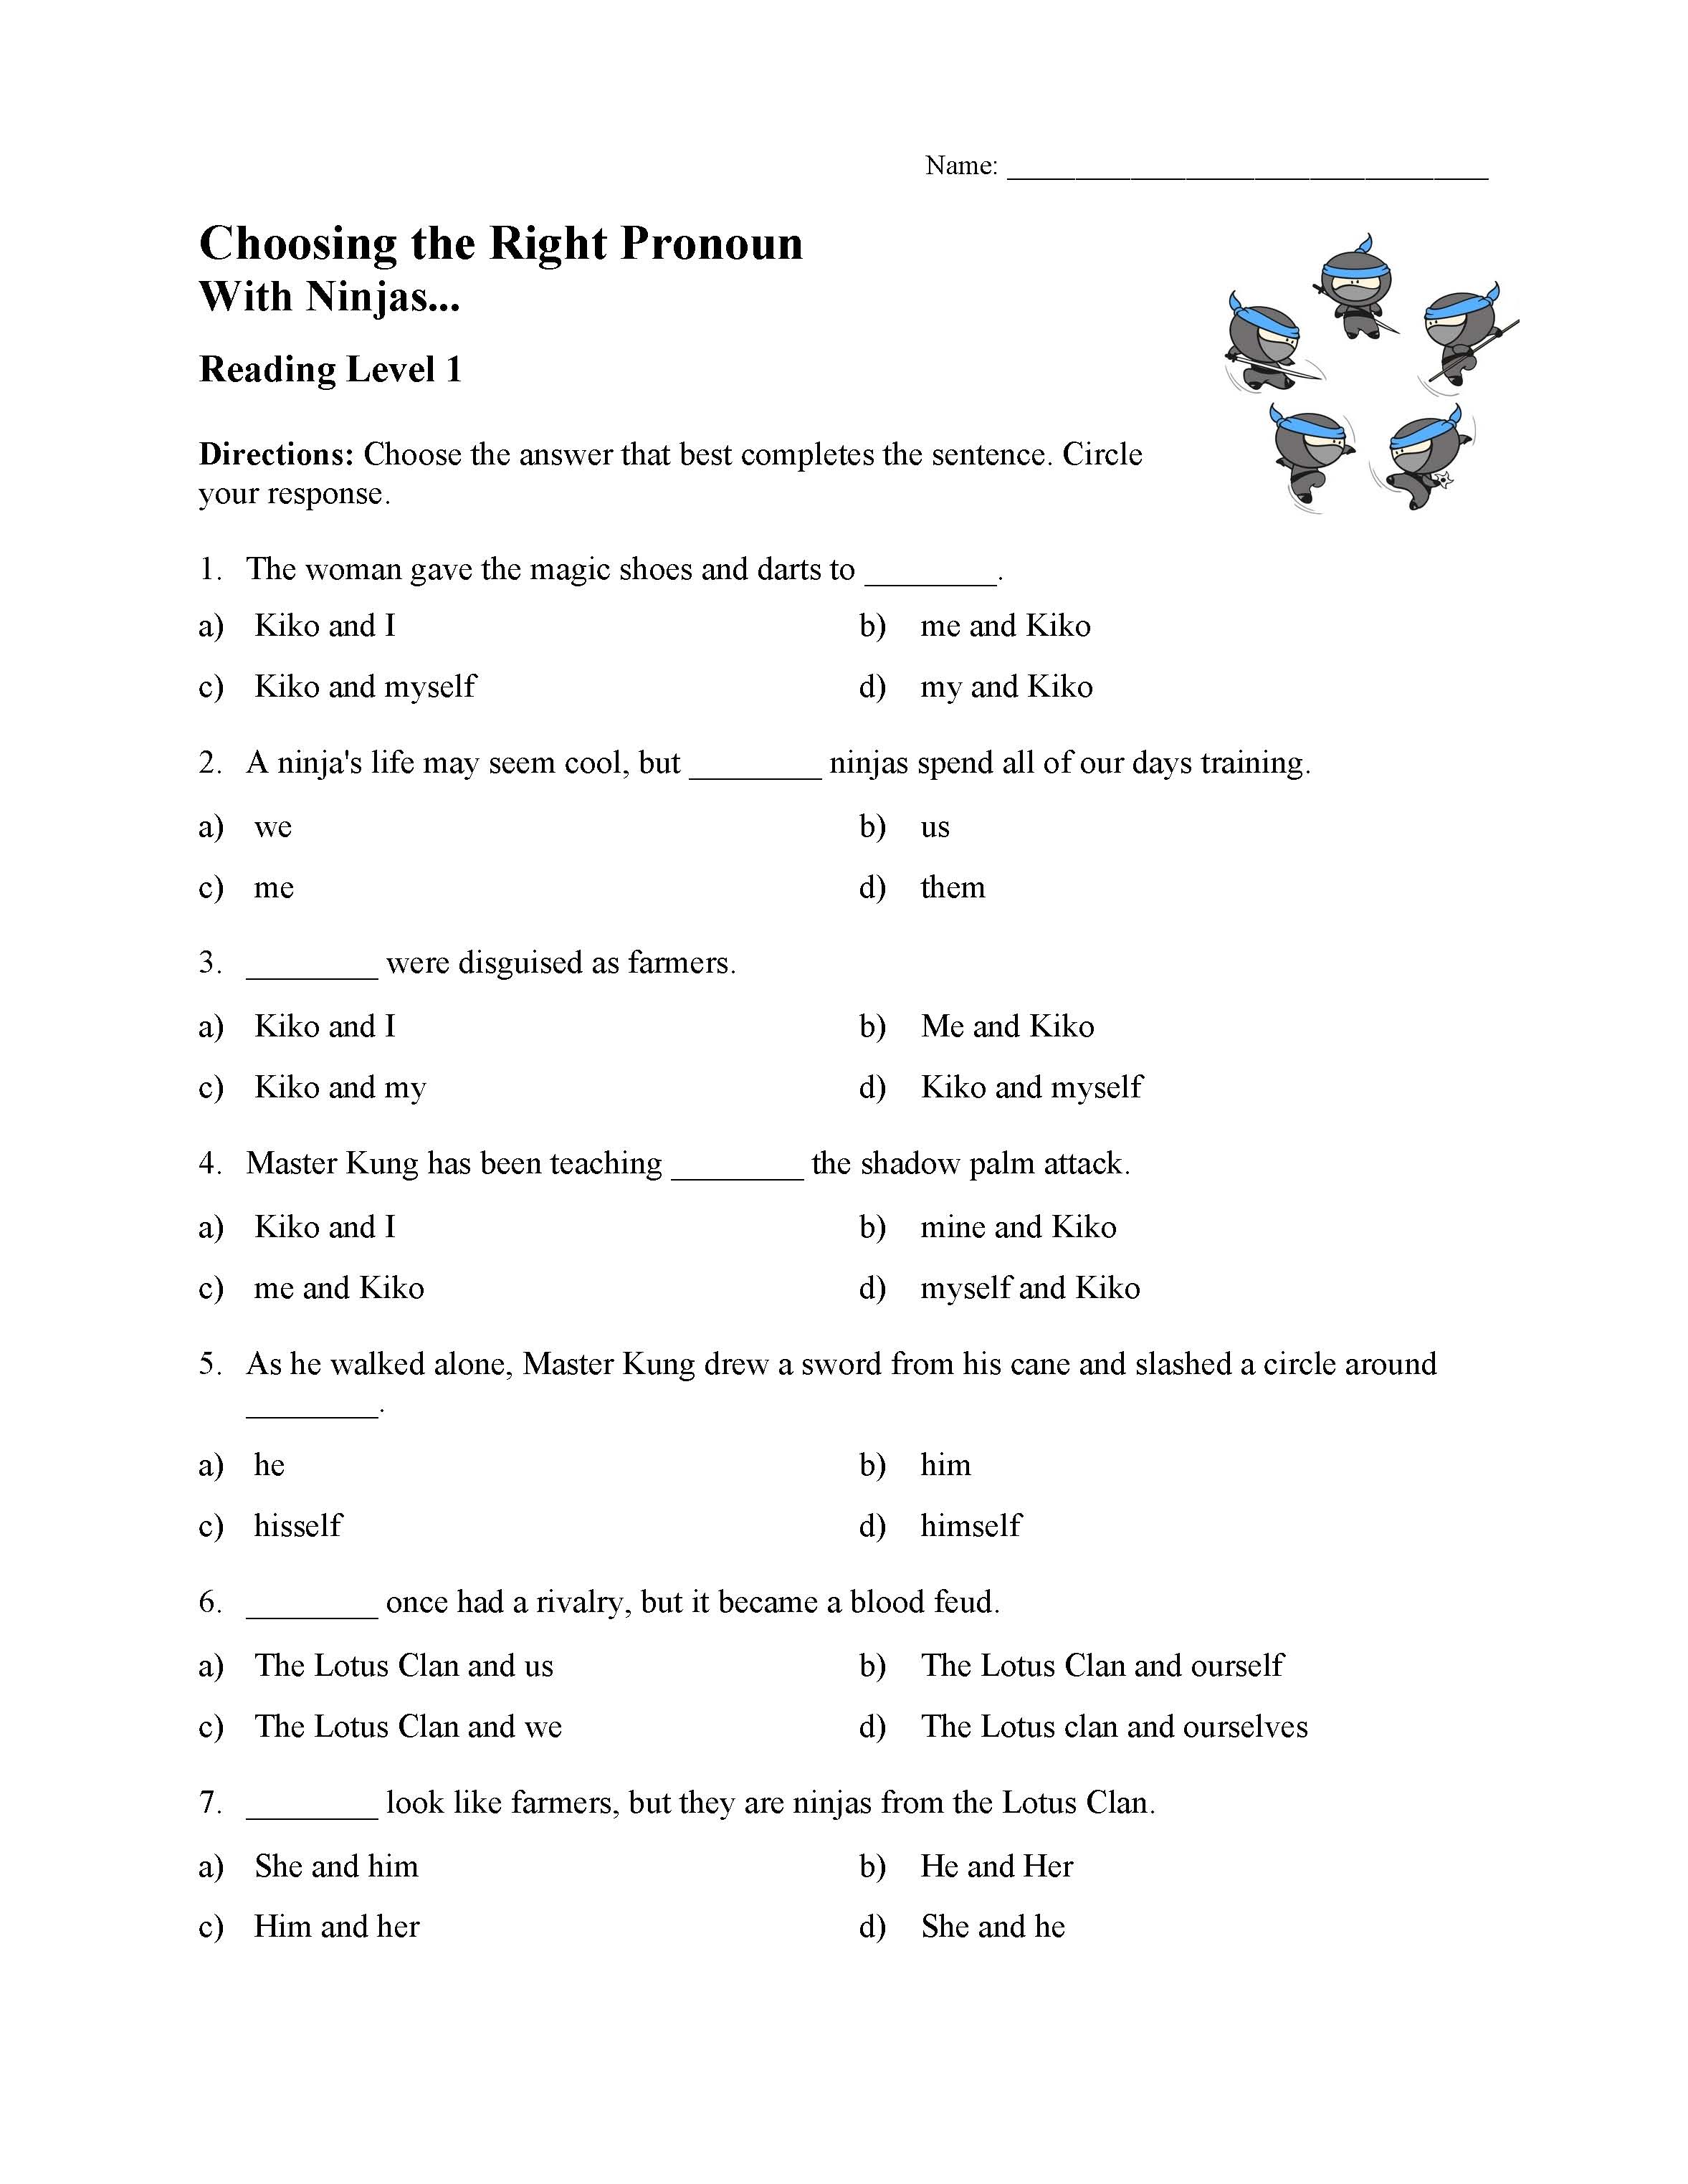 This is a preview image of the Choosing the Correct Pronoun Test with Ninjas - Reading Level 1.